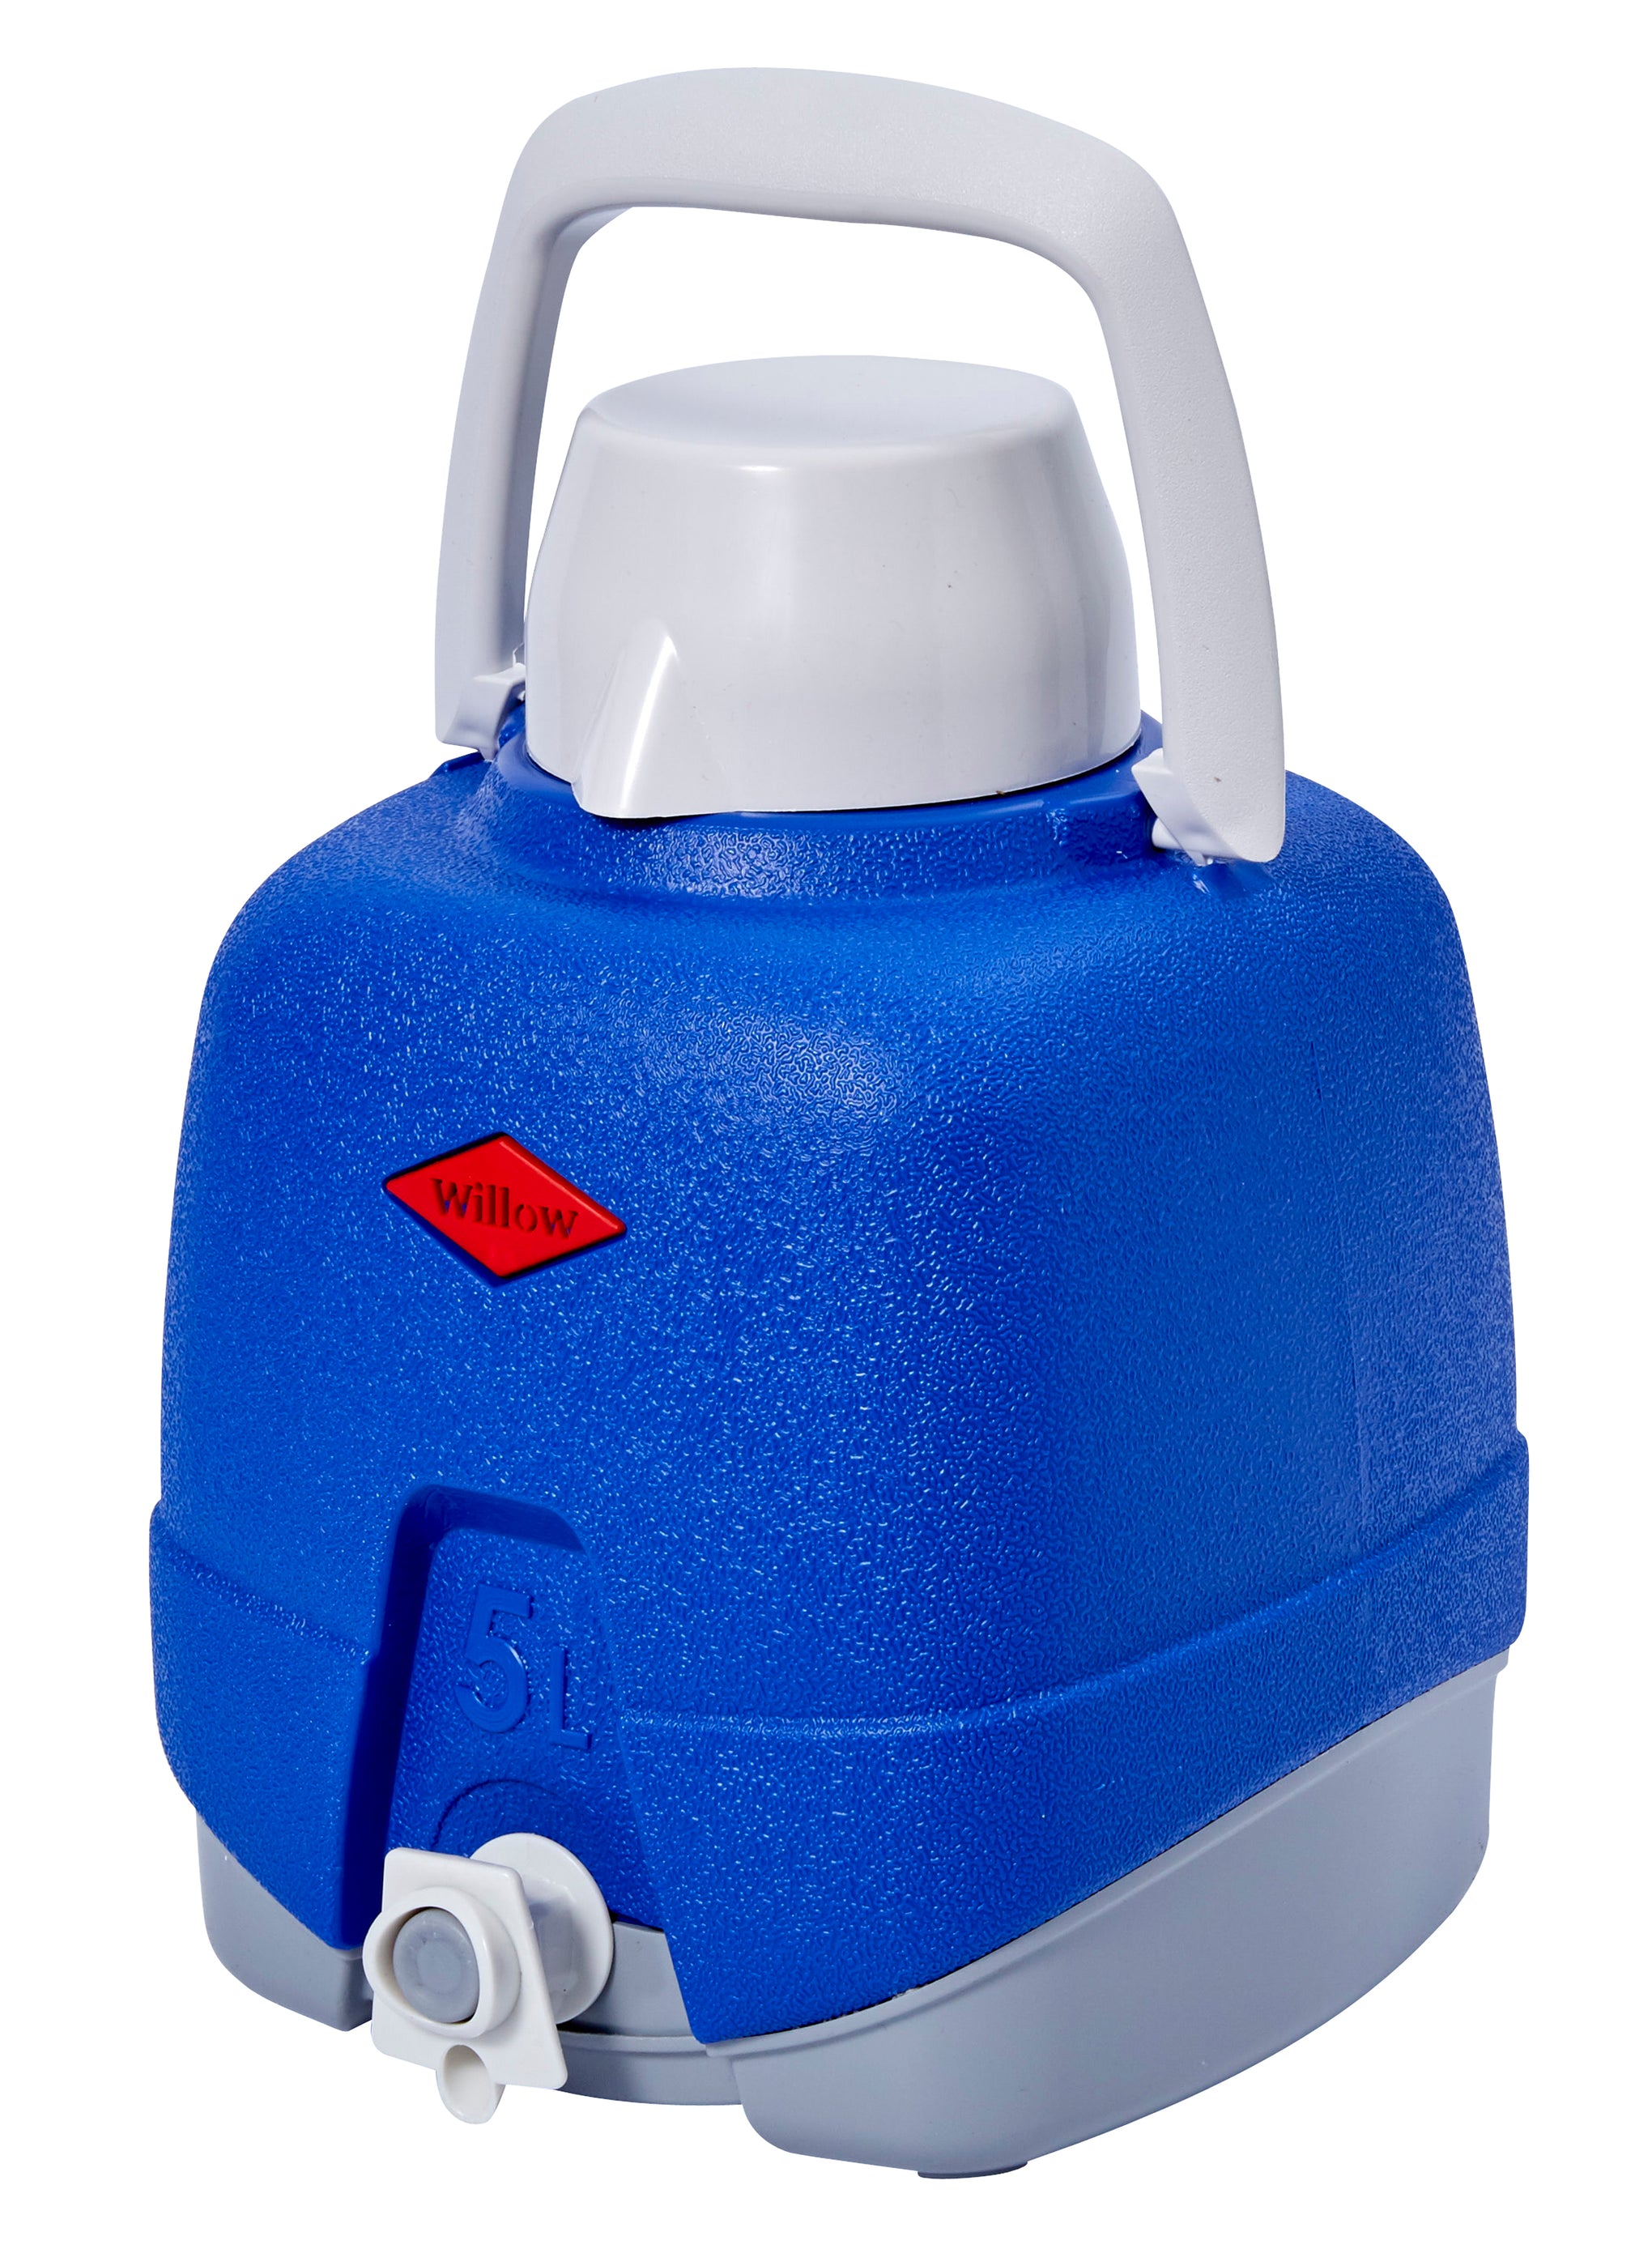 Willow Cooler Jug with Tap 5L